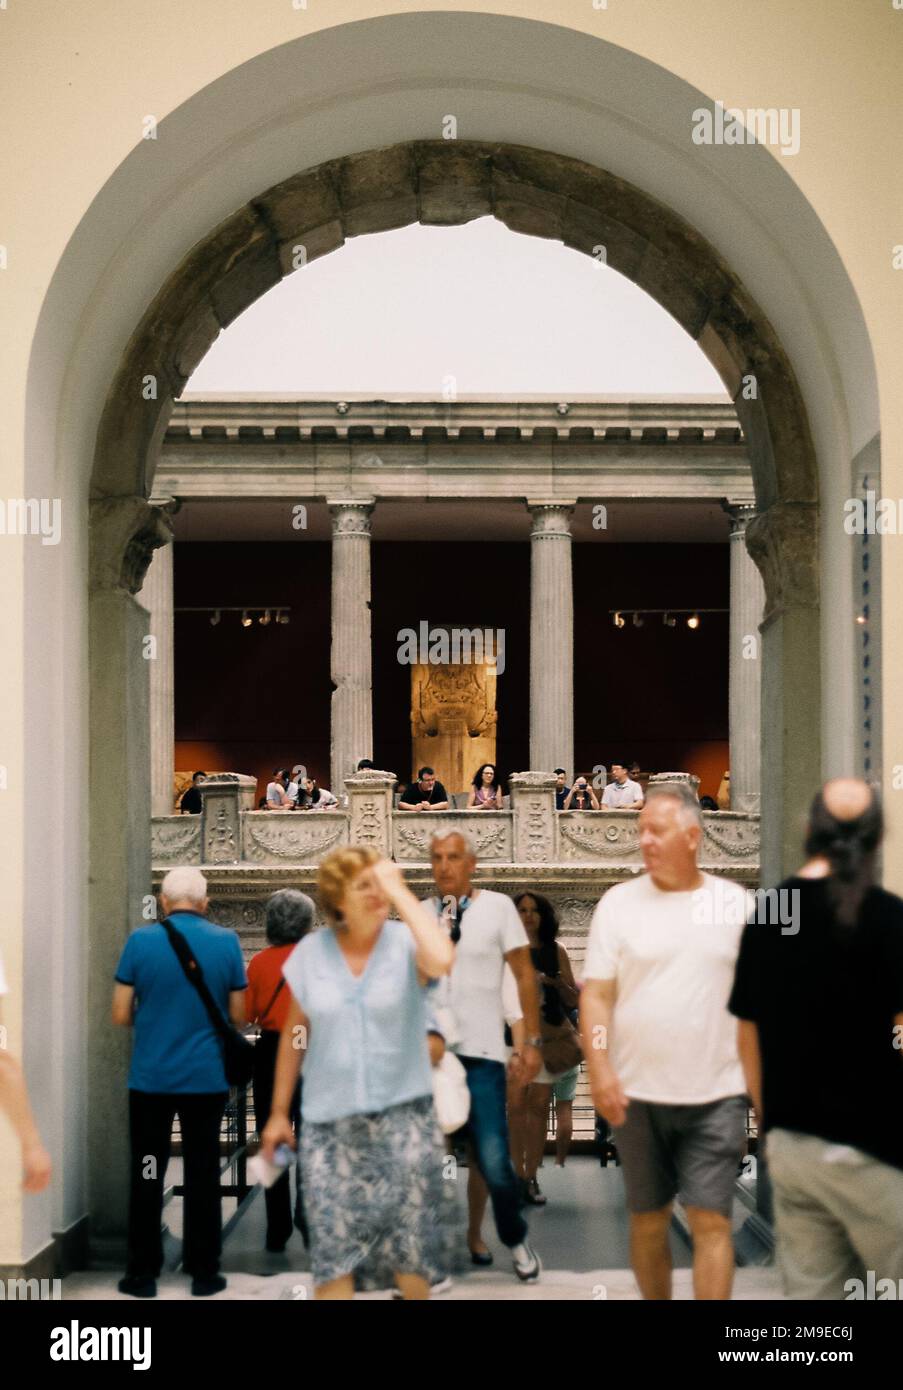 Interior of Pergamon Museum. Museum visitors in the foreground. Analog photography shot with Minolta X-300. Stock Photo